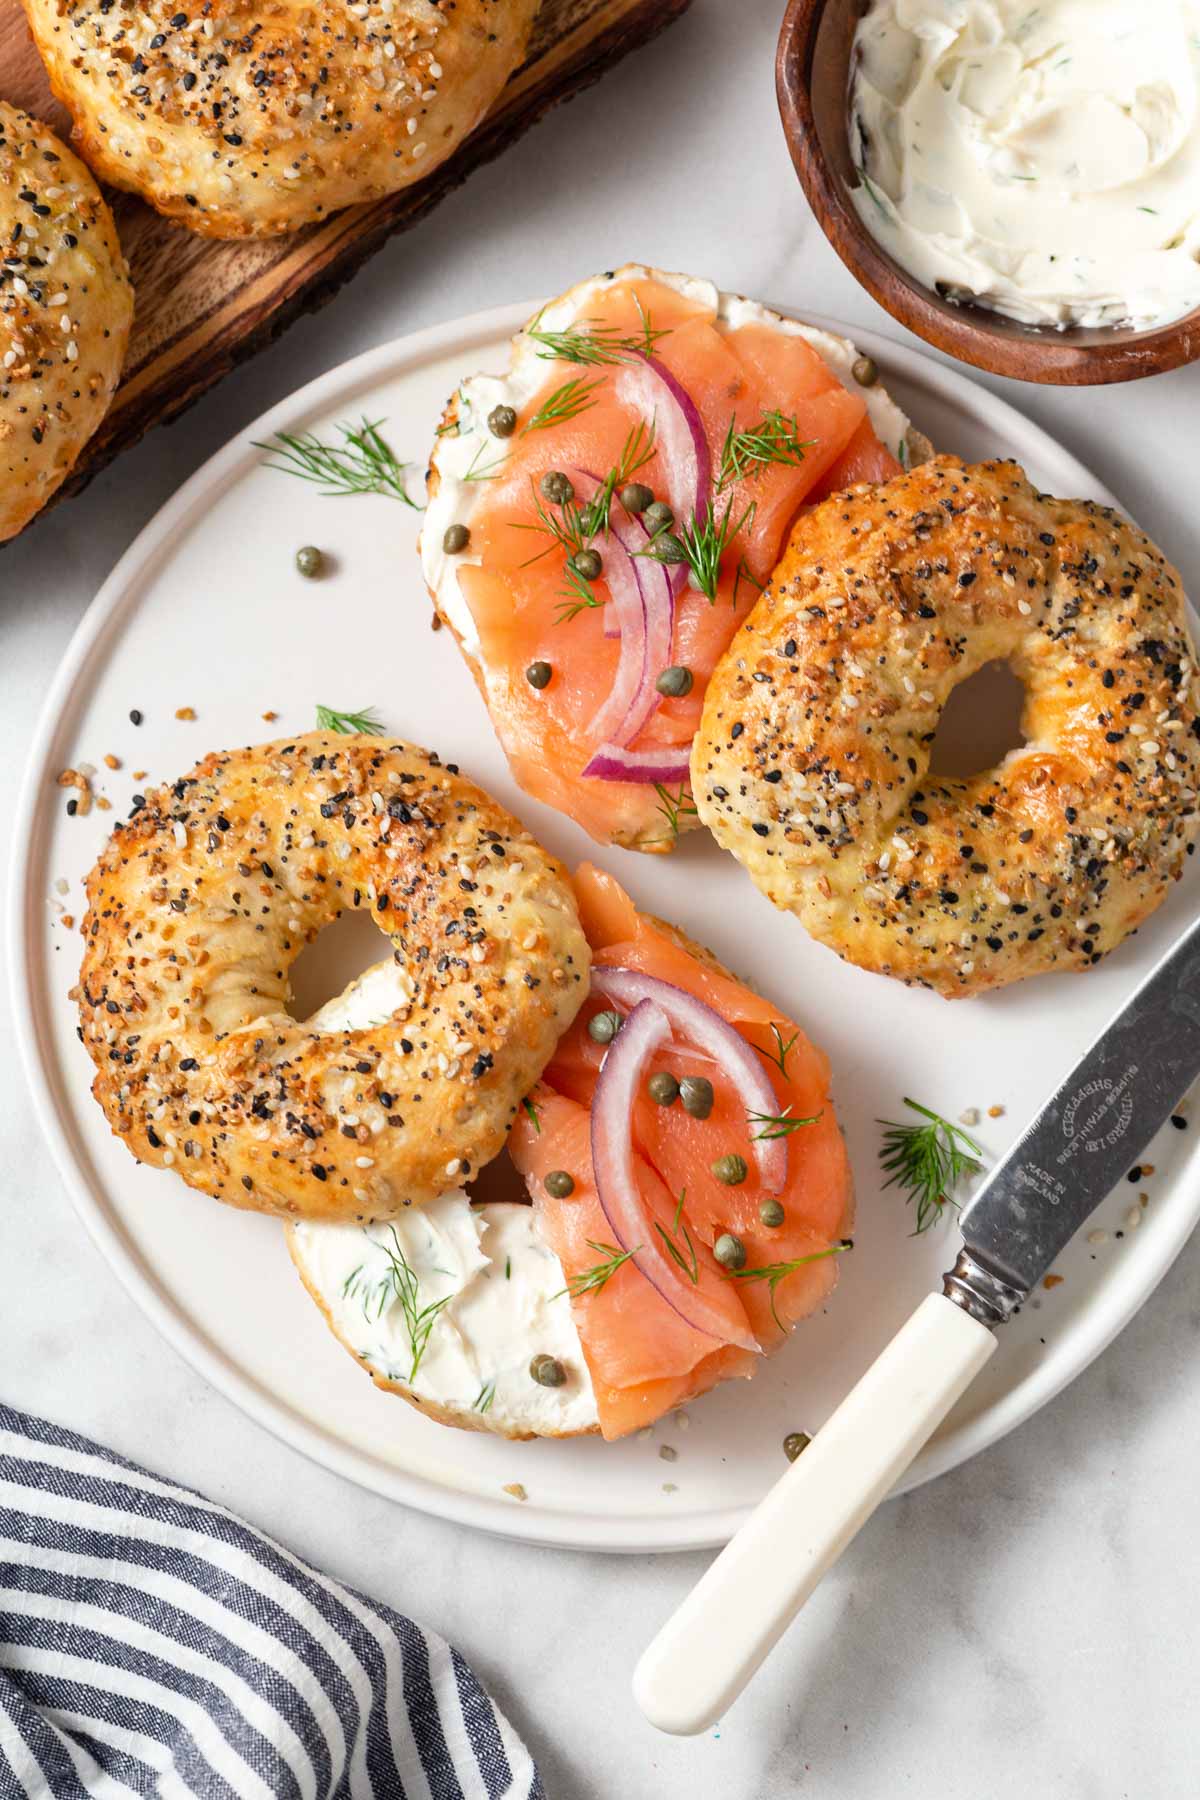 air fryer everything bagels with herbed cream cheese and smoked salmon.